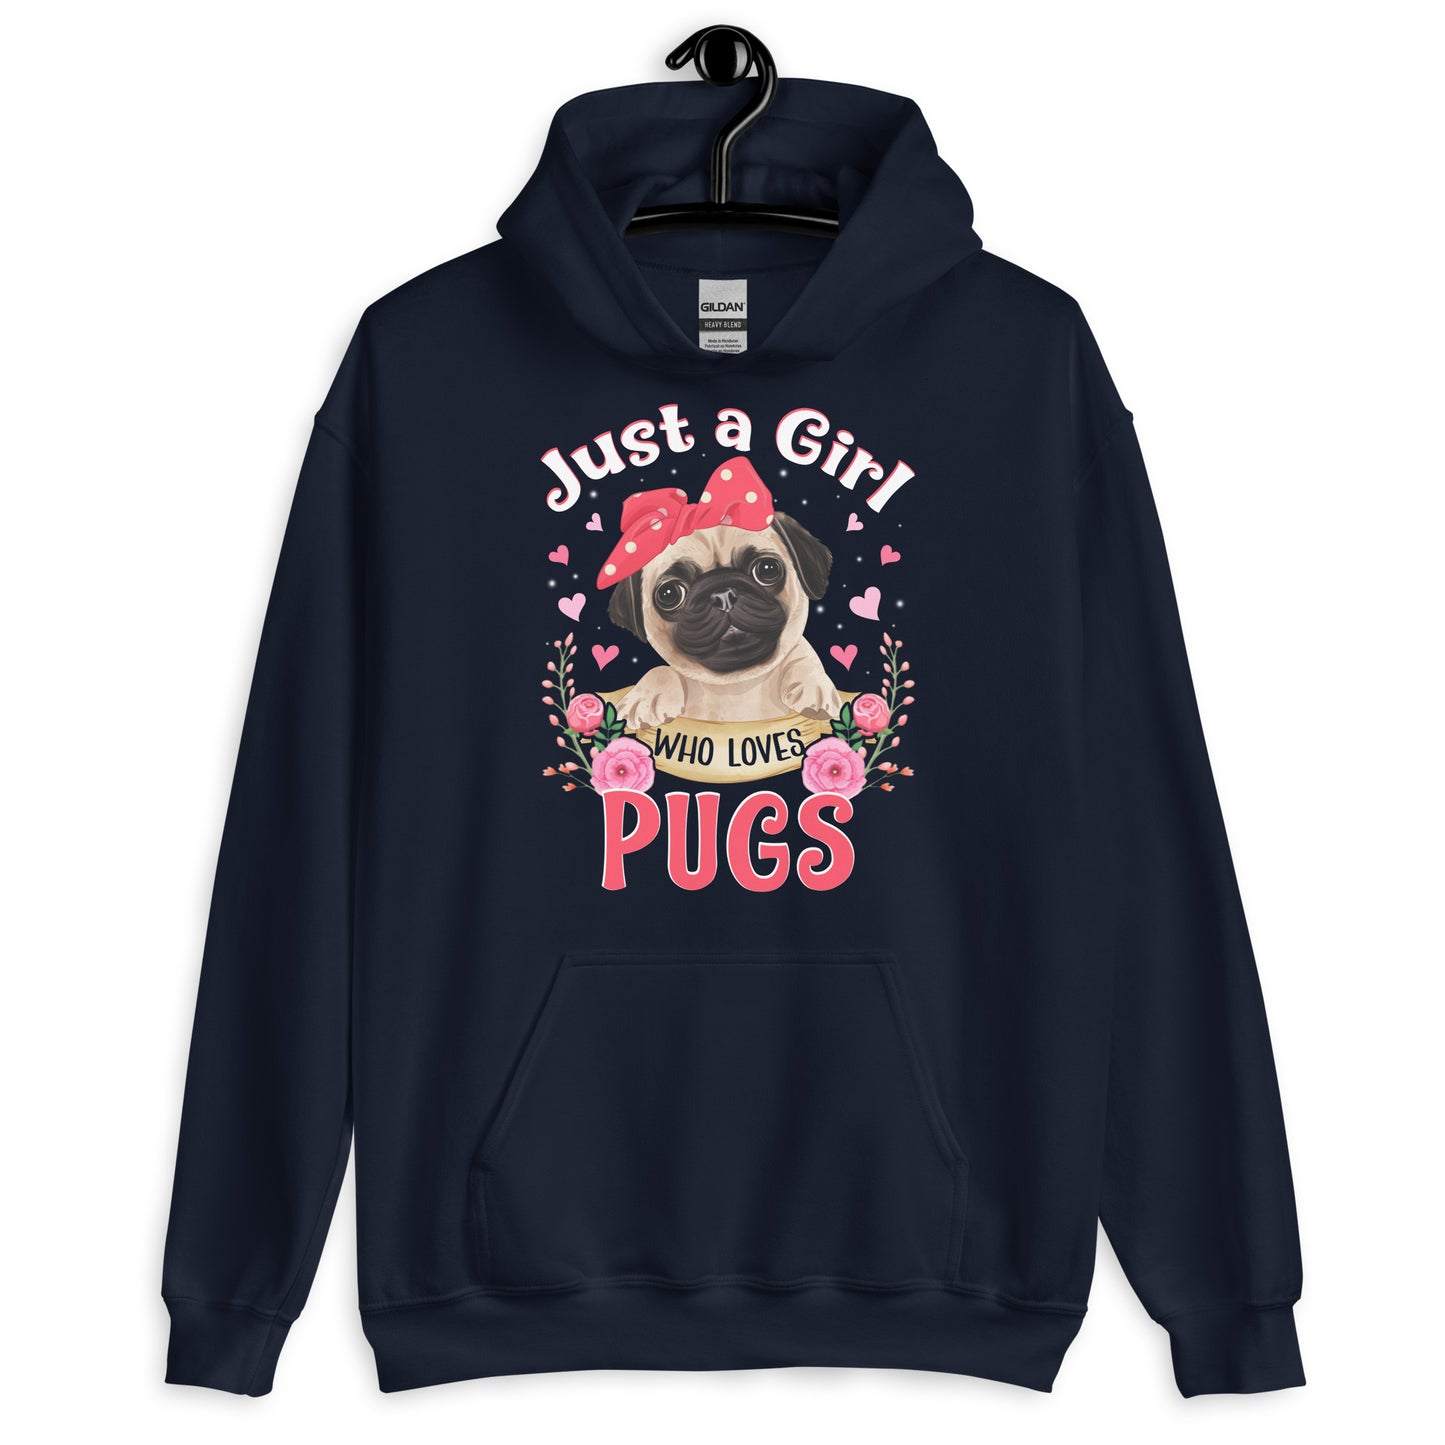 Just a Girl Who Loves Pugs Hoodie